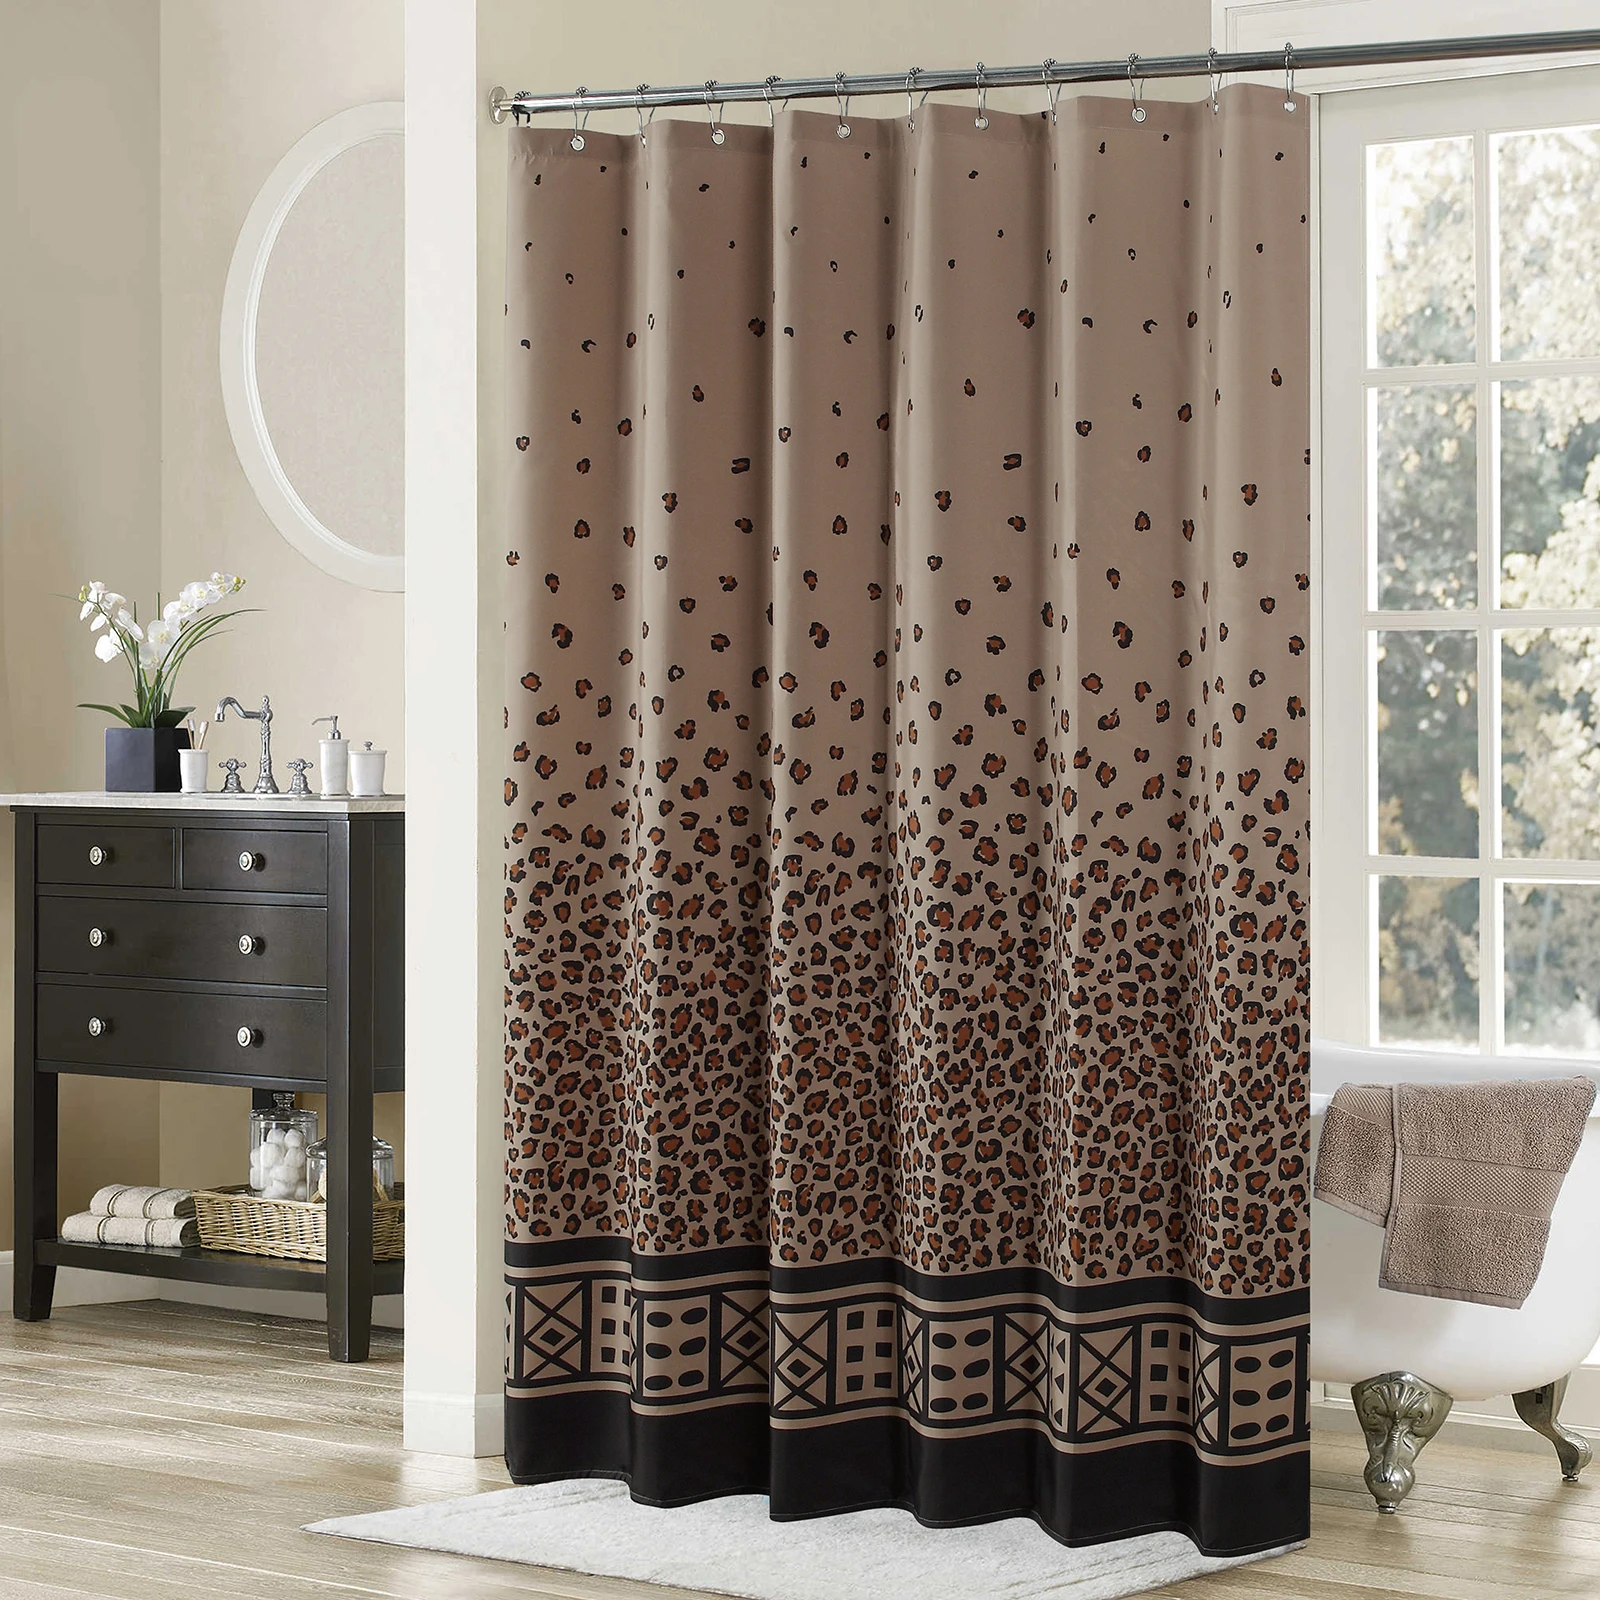 

Leopard Brown Modern Polyester Waterproof Fabric Tan Decoratived Farmhouse Chocolate Shower Curtain